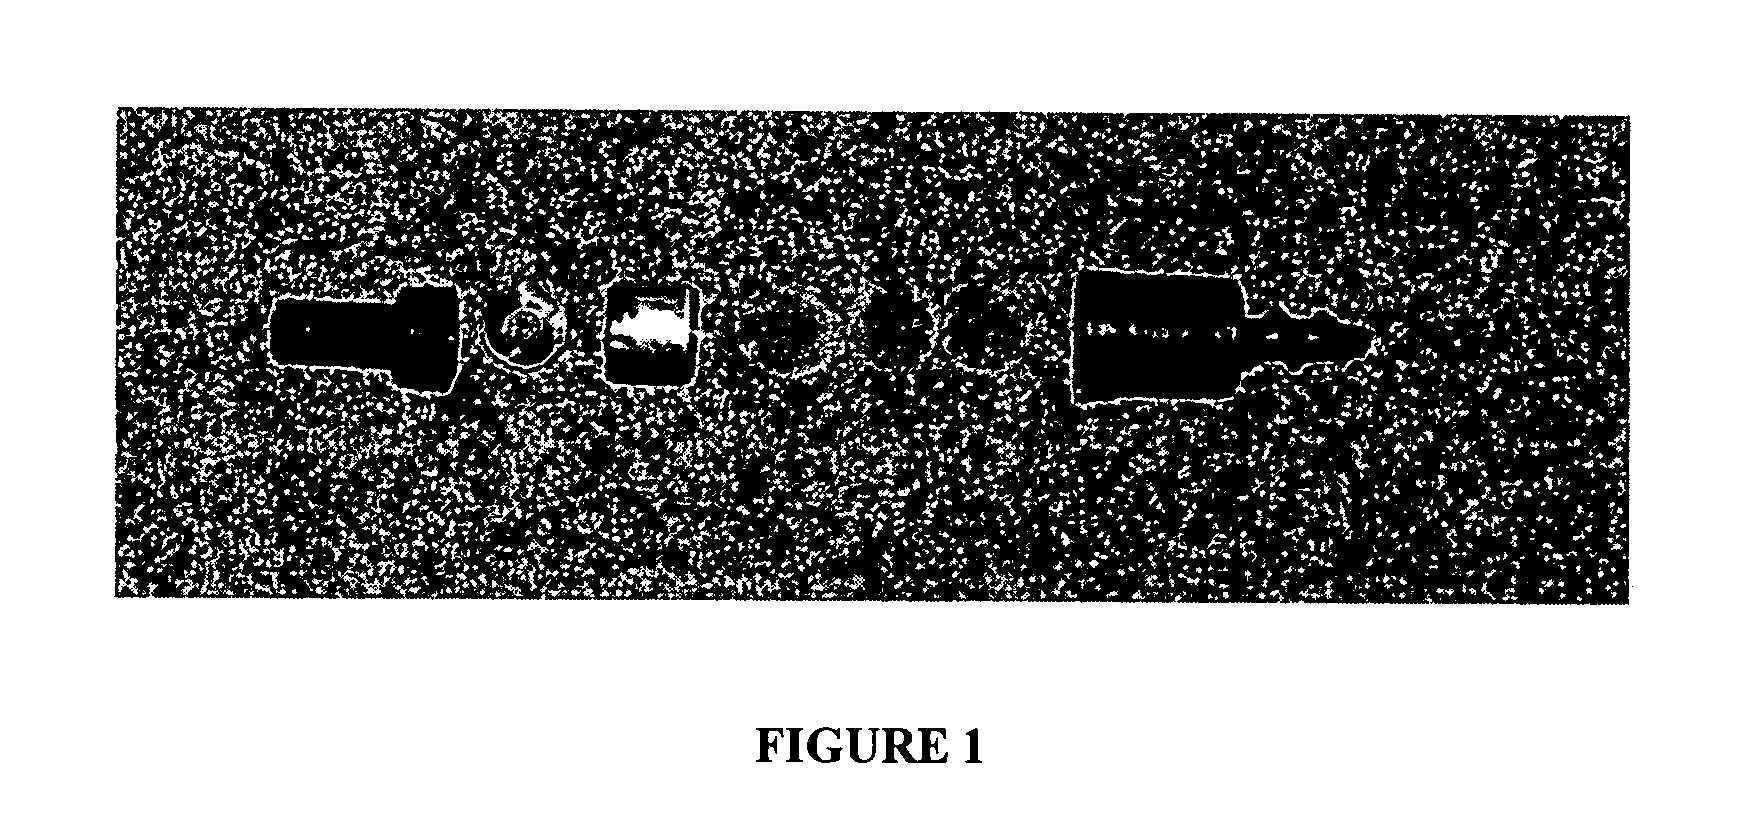 Filter system for hearing protection device for continuous noise exposure monitoring